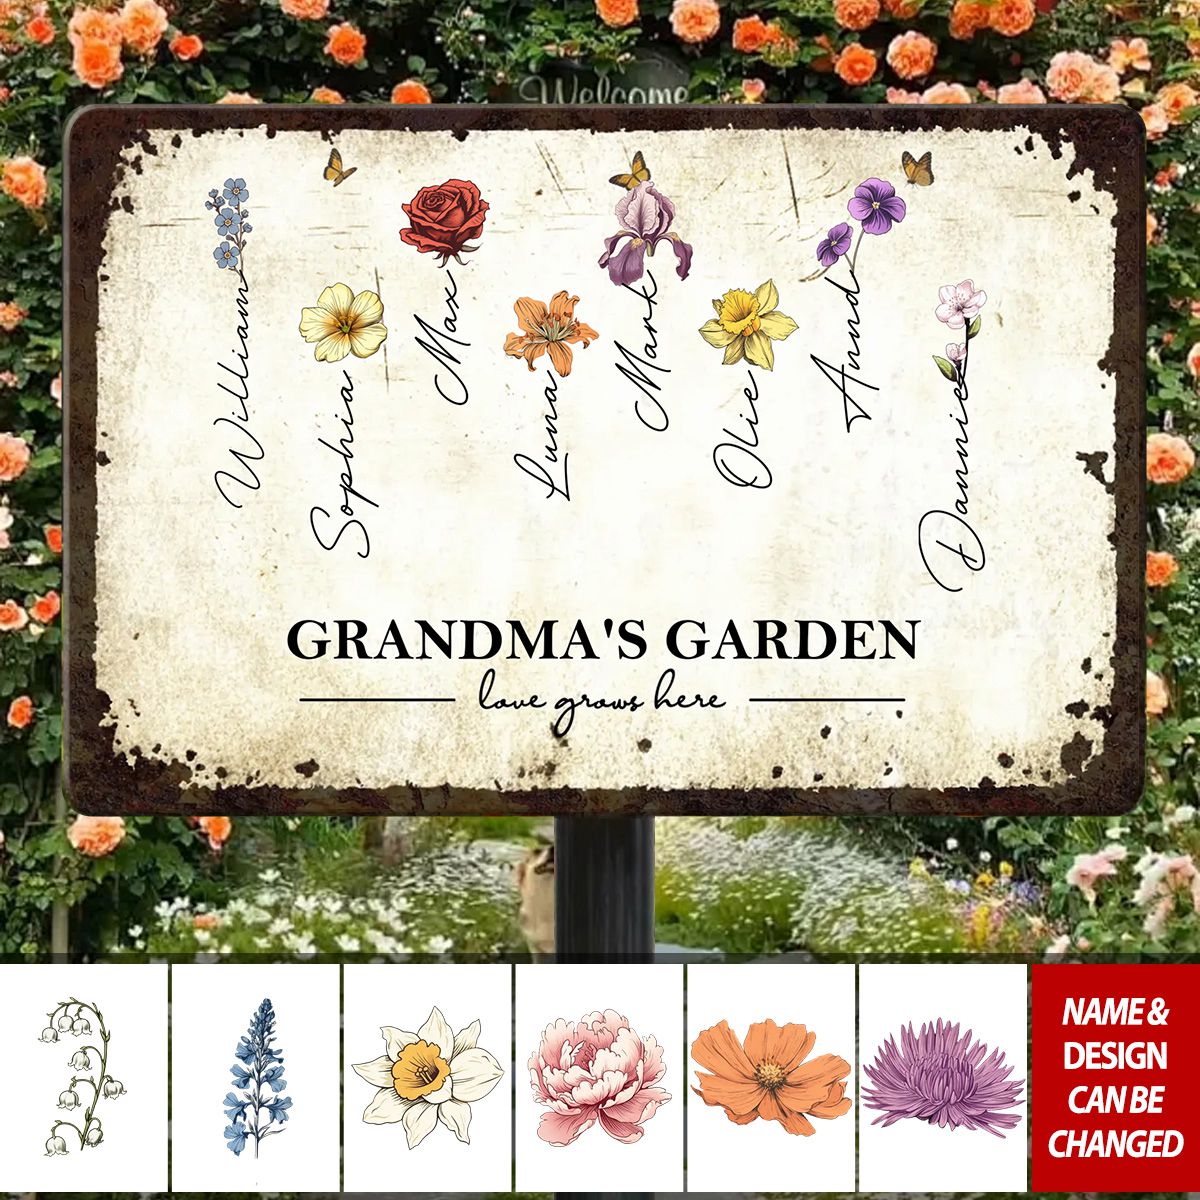 Love Grows Here - Personalized Custom Metal Sign - Gift For Grandma